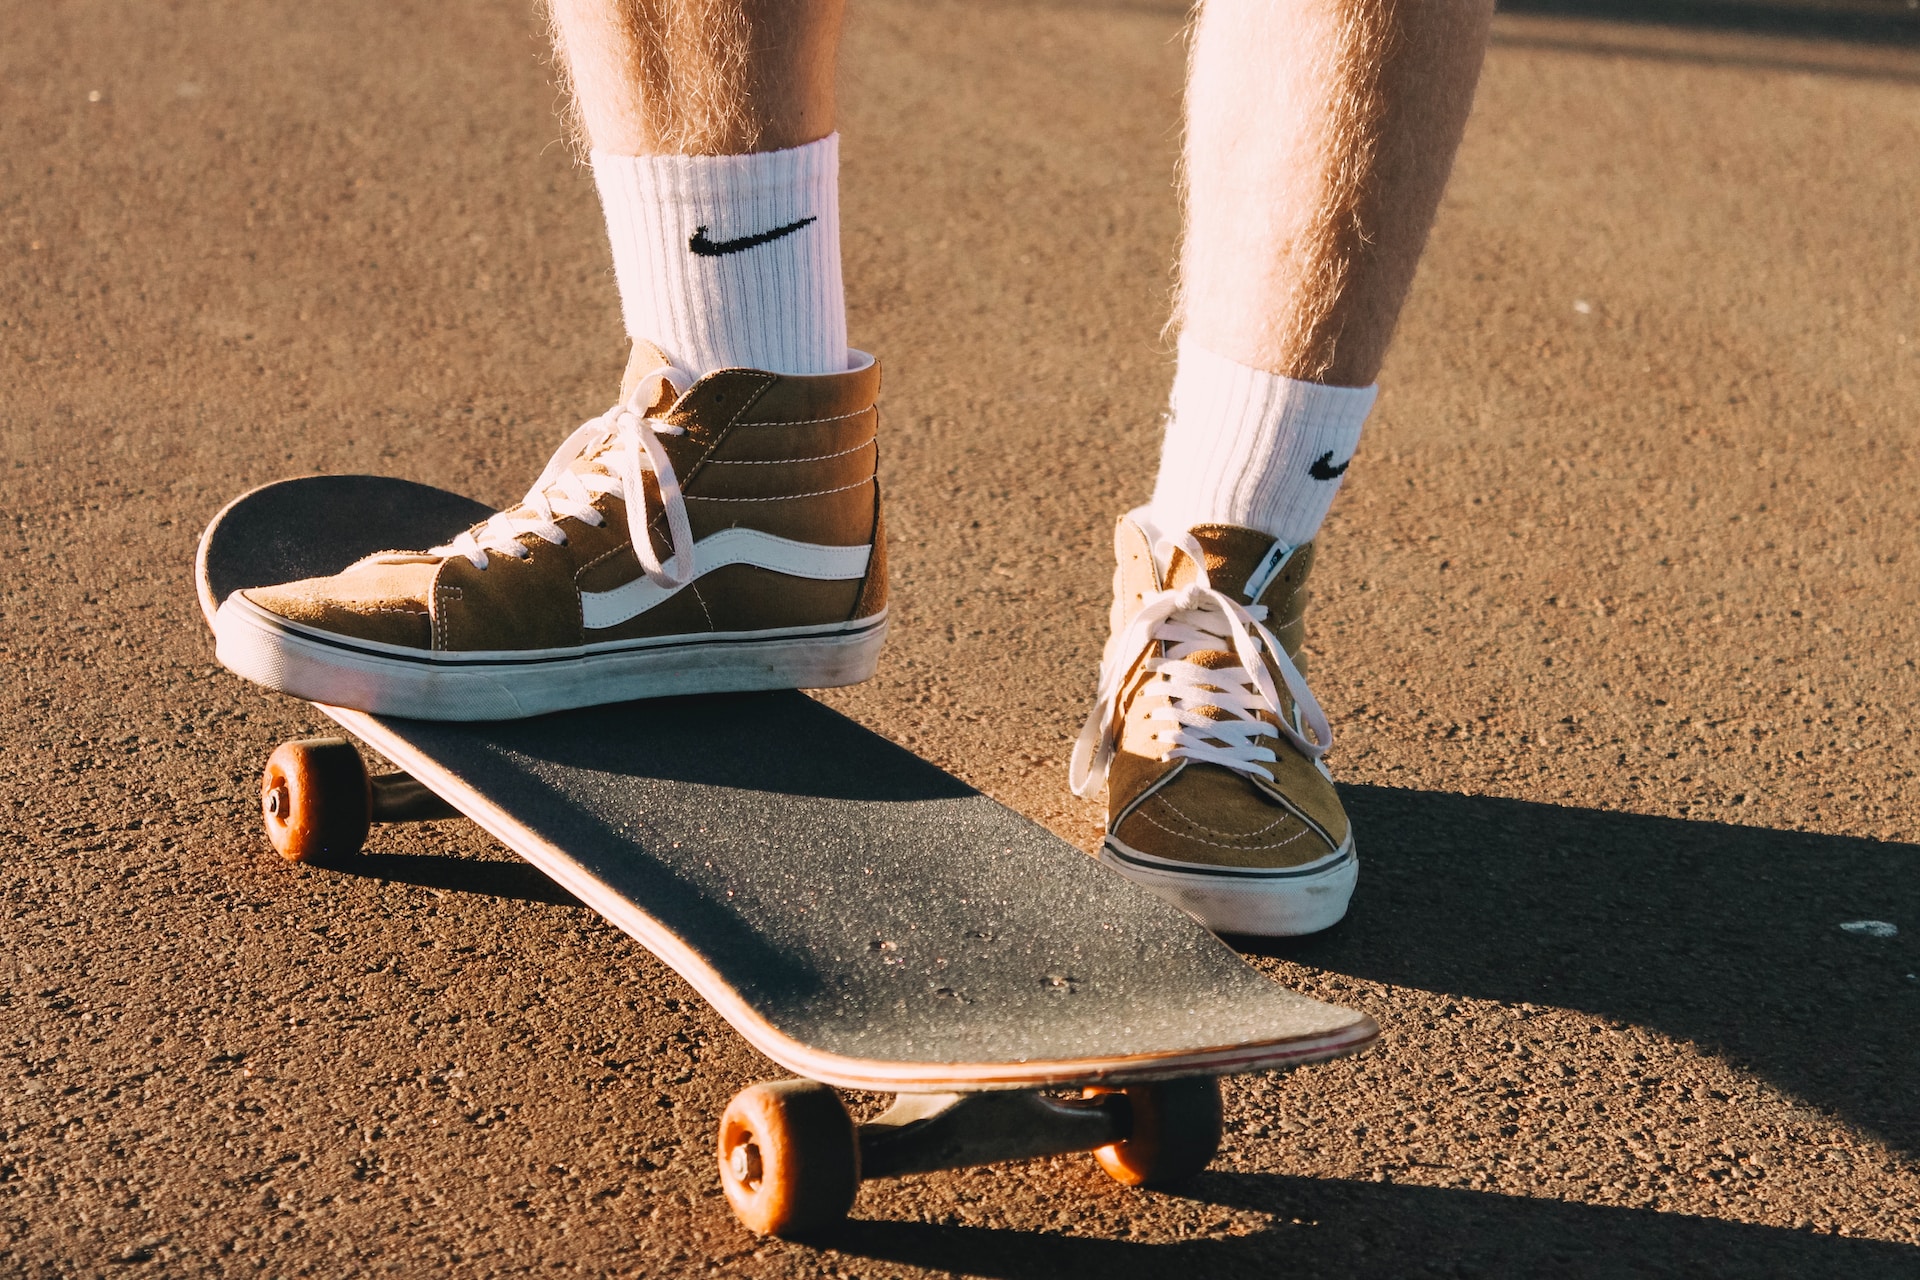 skateboarding shoe features to enhance performance